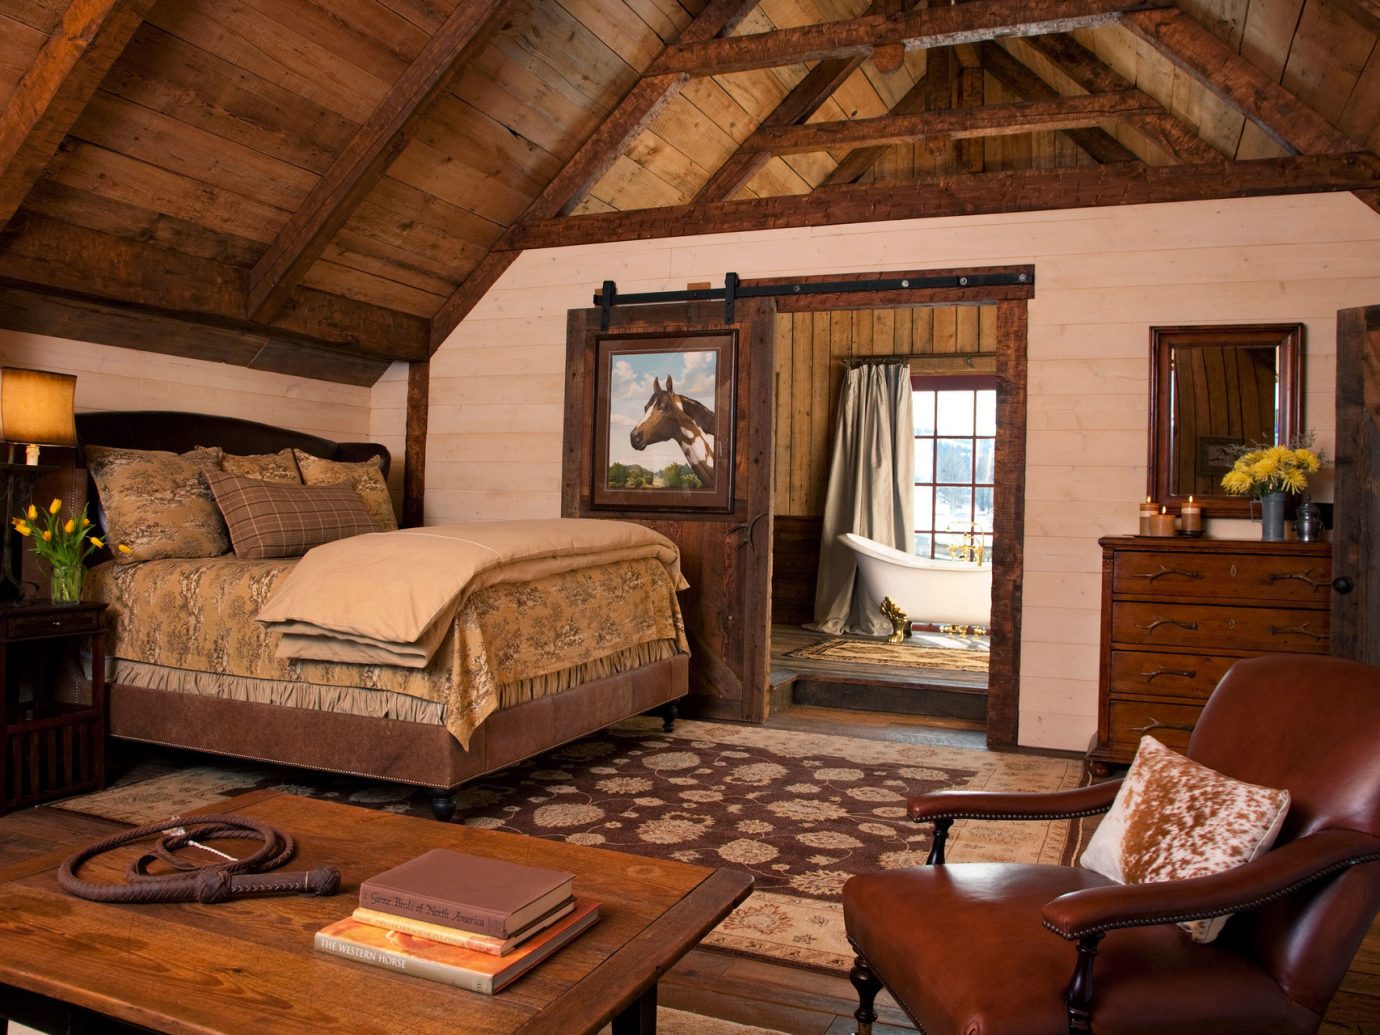 Bath bed Bedroom charming cozy extravagant homey Luxury Rustic Trip Ideas view warm indoor Living room table floor ceiling property chair living room estate log cabin home house cottage furniture farmhouse hardwood interior design wood real estate Villa area dining table